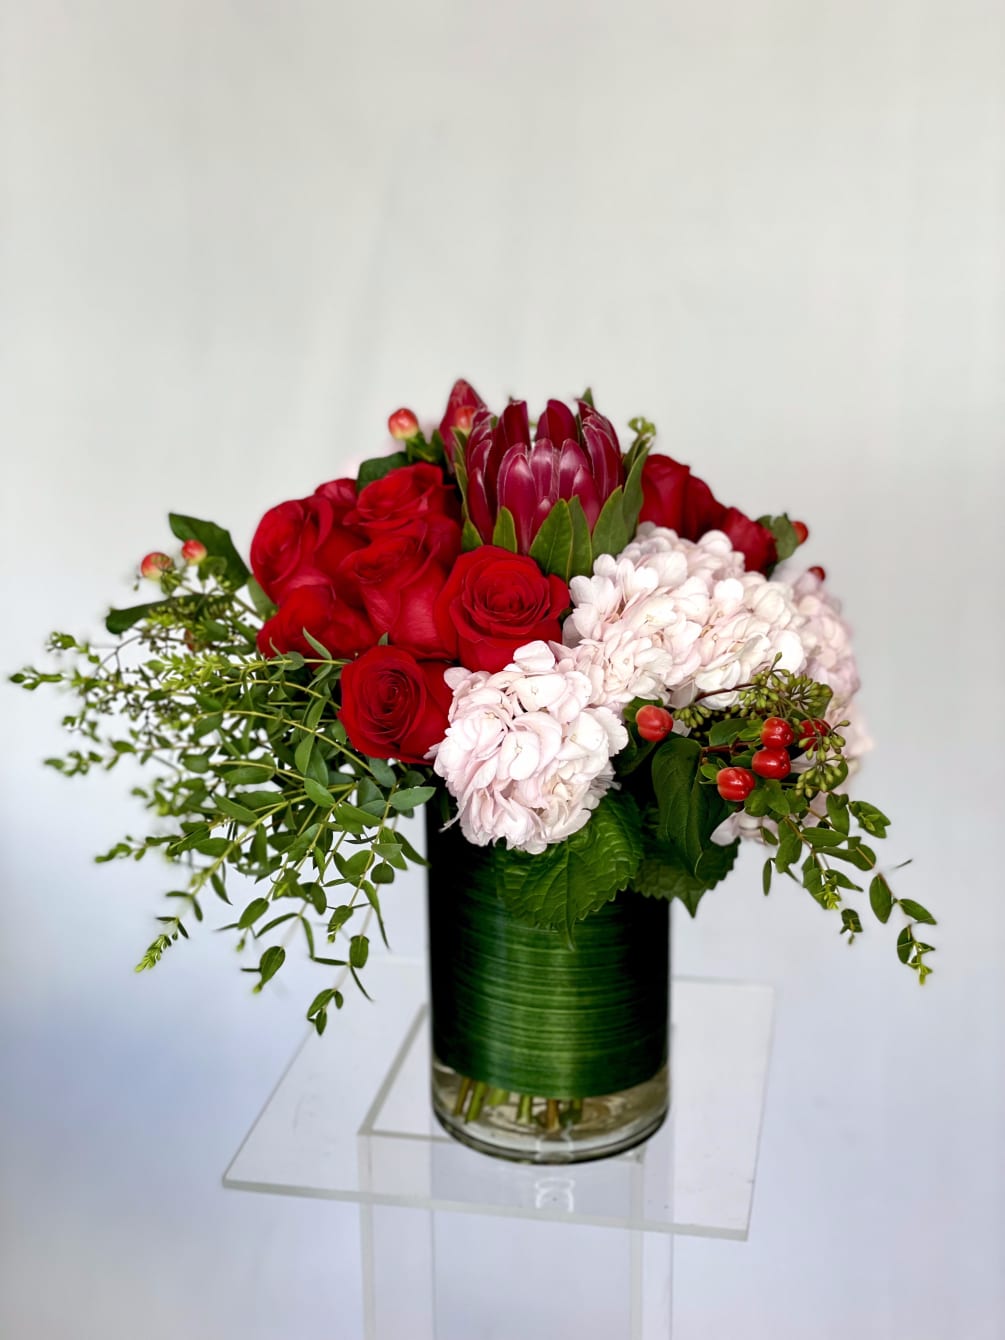 An amazing arrangement consisting of red roses, pink or green hydrangeas, and